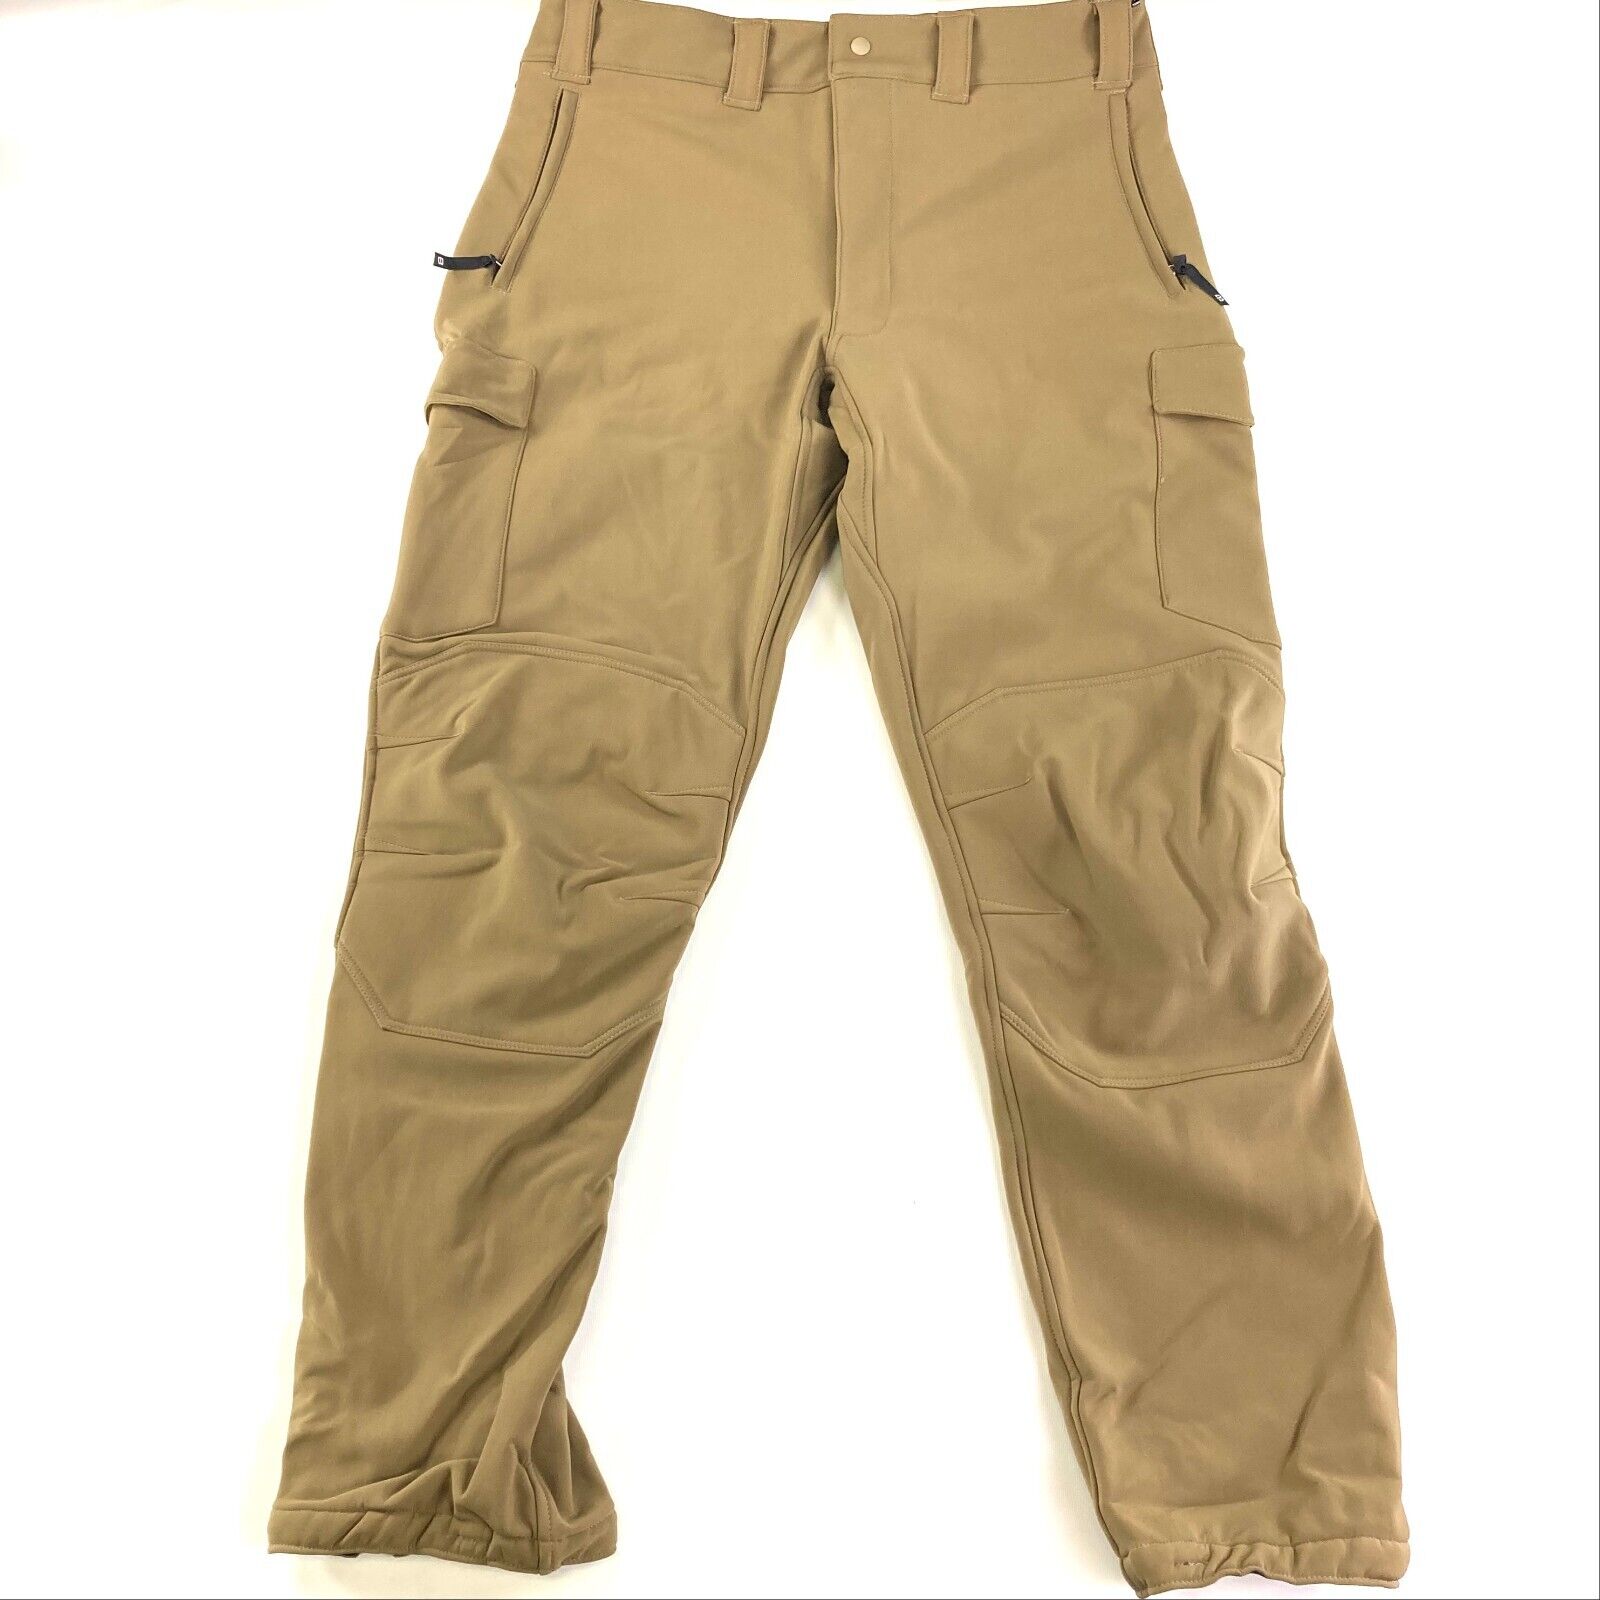 Beyond Cold Fusion L5 Soft Shell Pants Coyote Brown ECWCS Trousers LARGE REGULAR